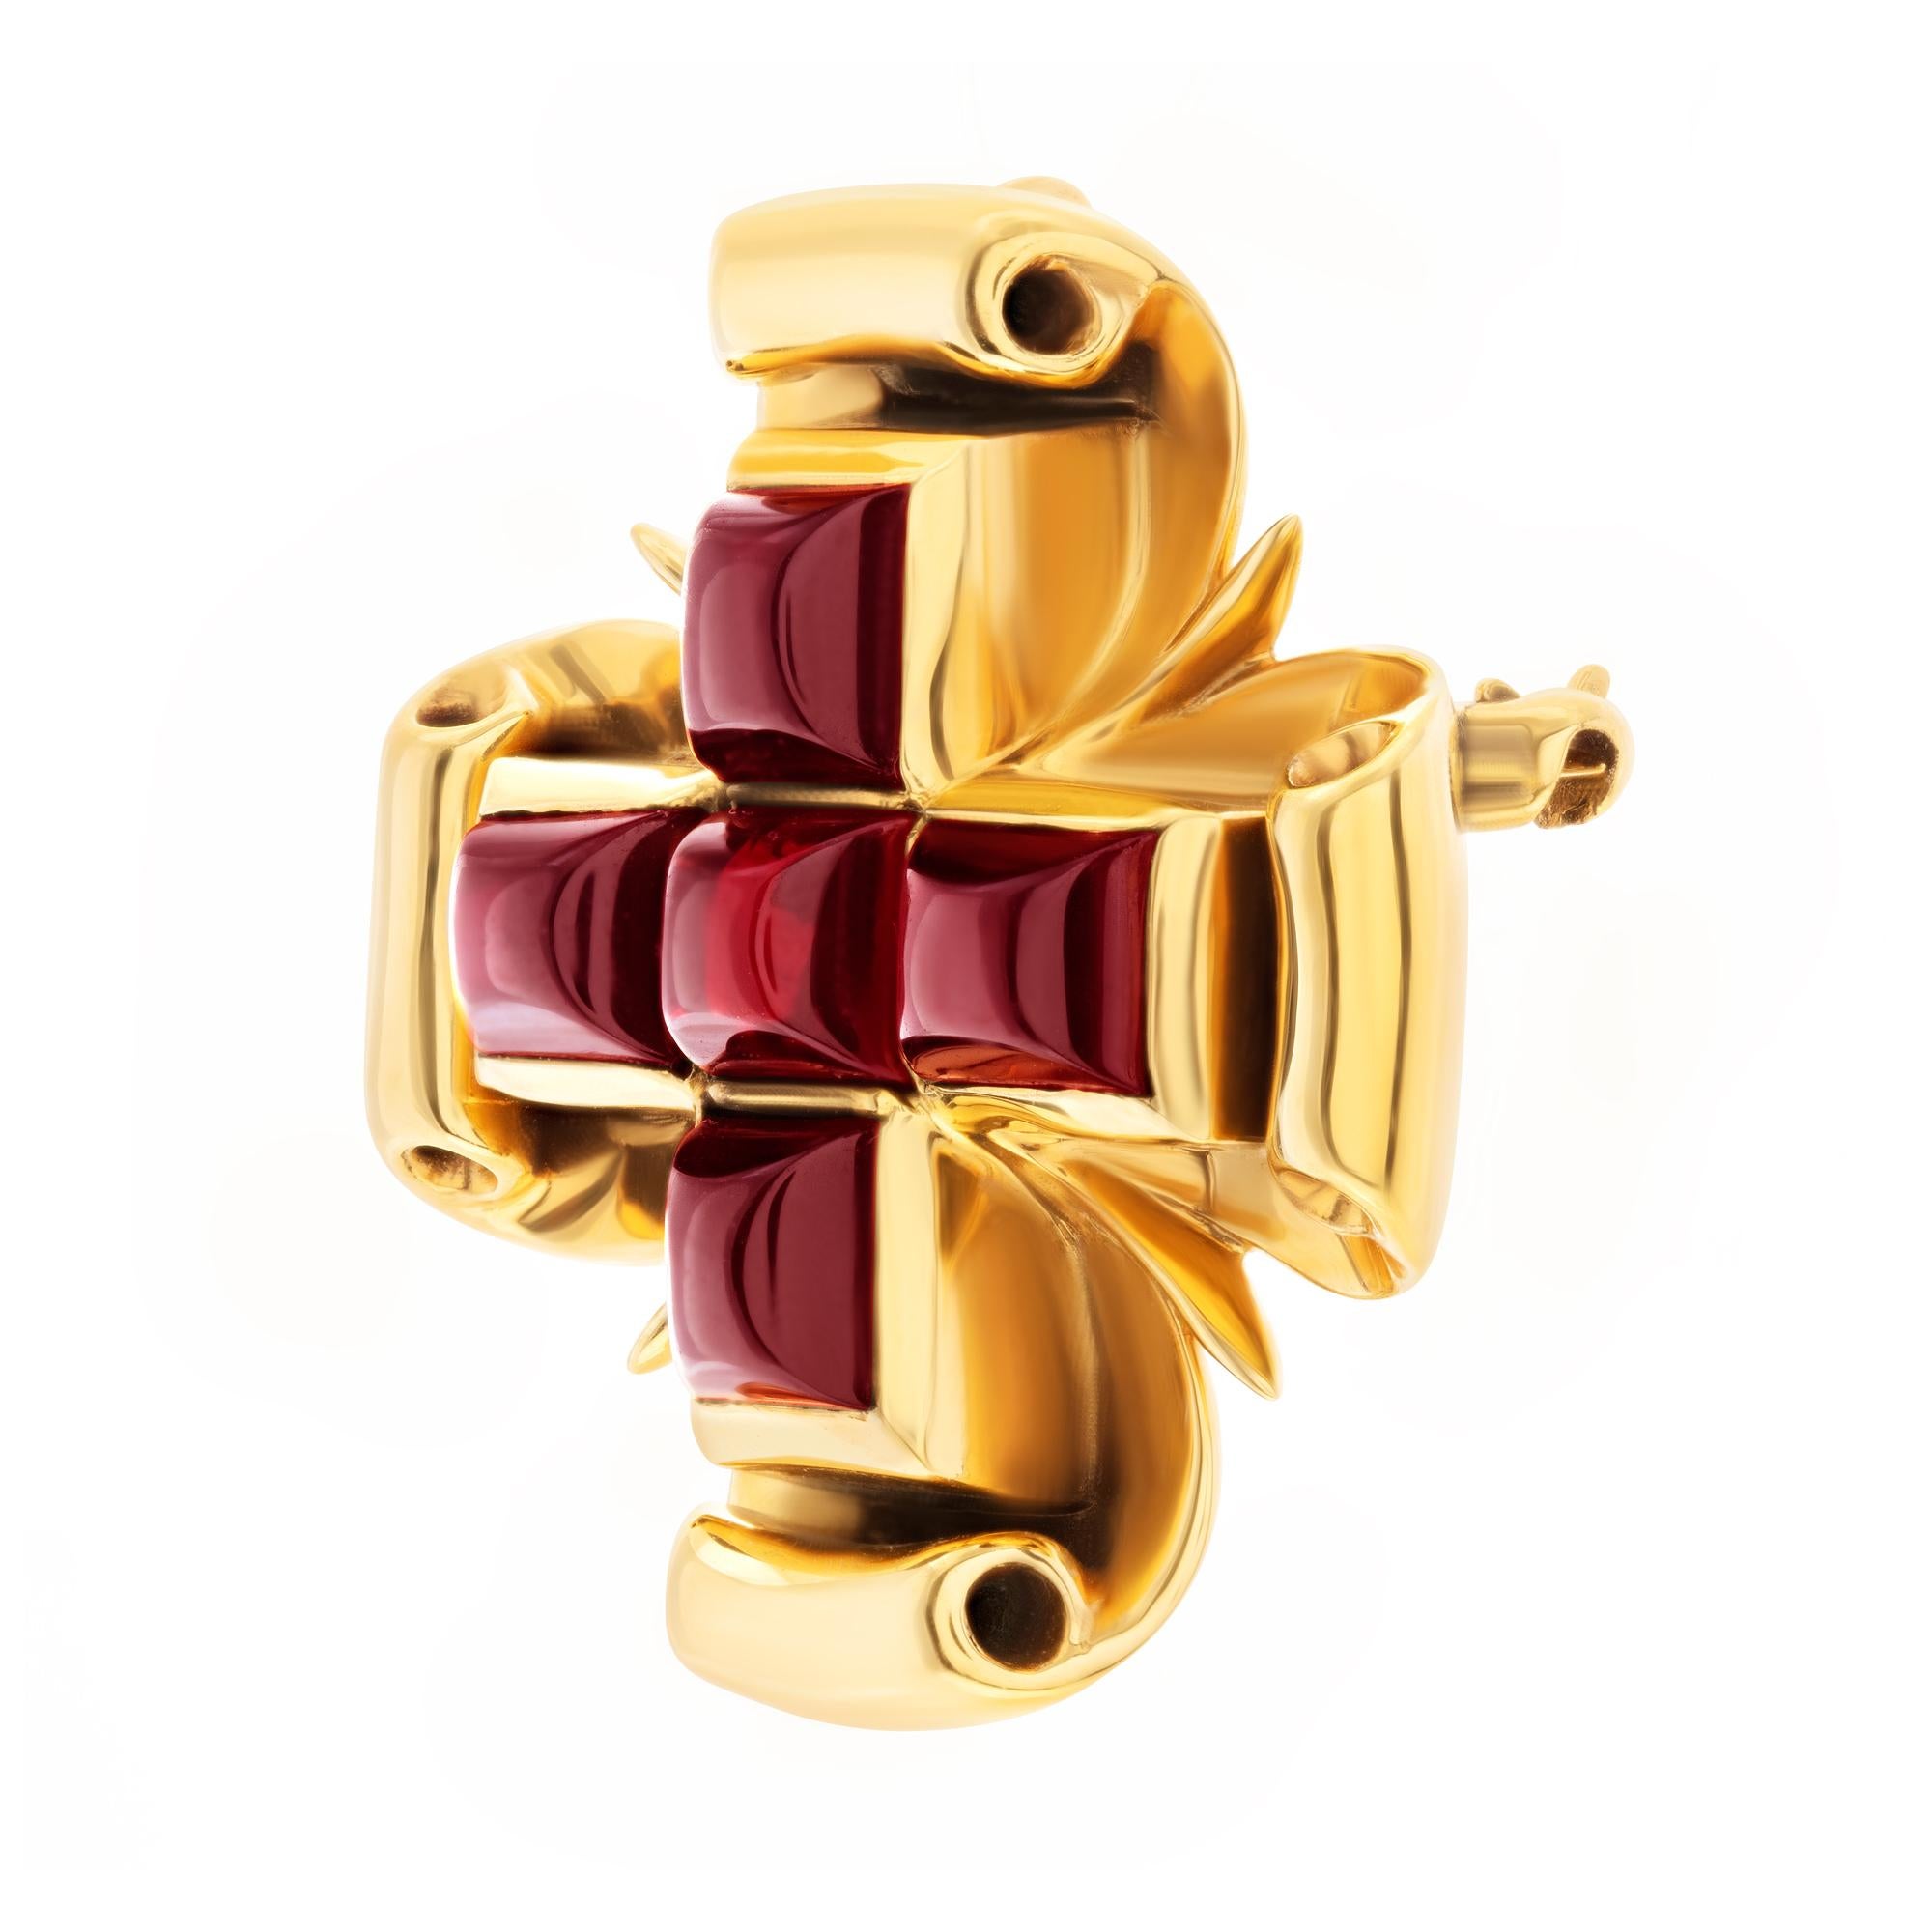 Byzantine cross brooch/pendant with garnet set in 14k gold, from the 